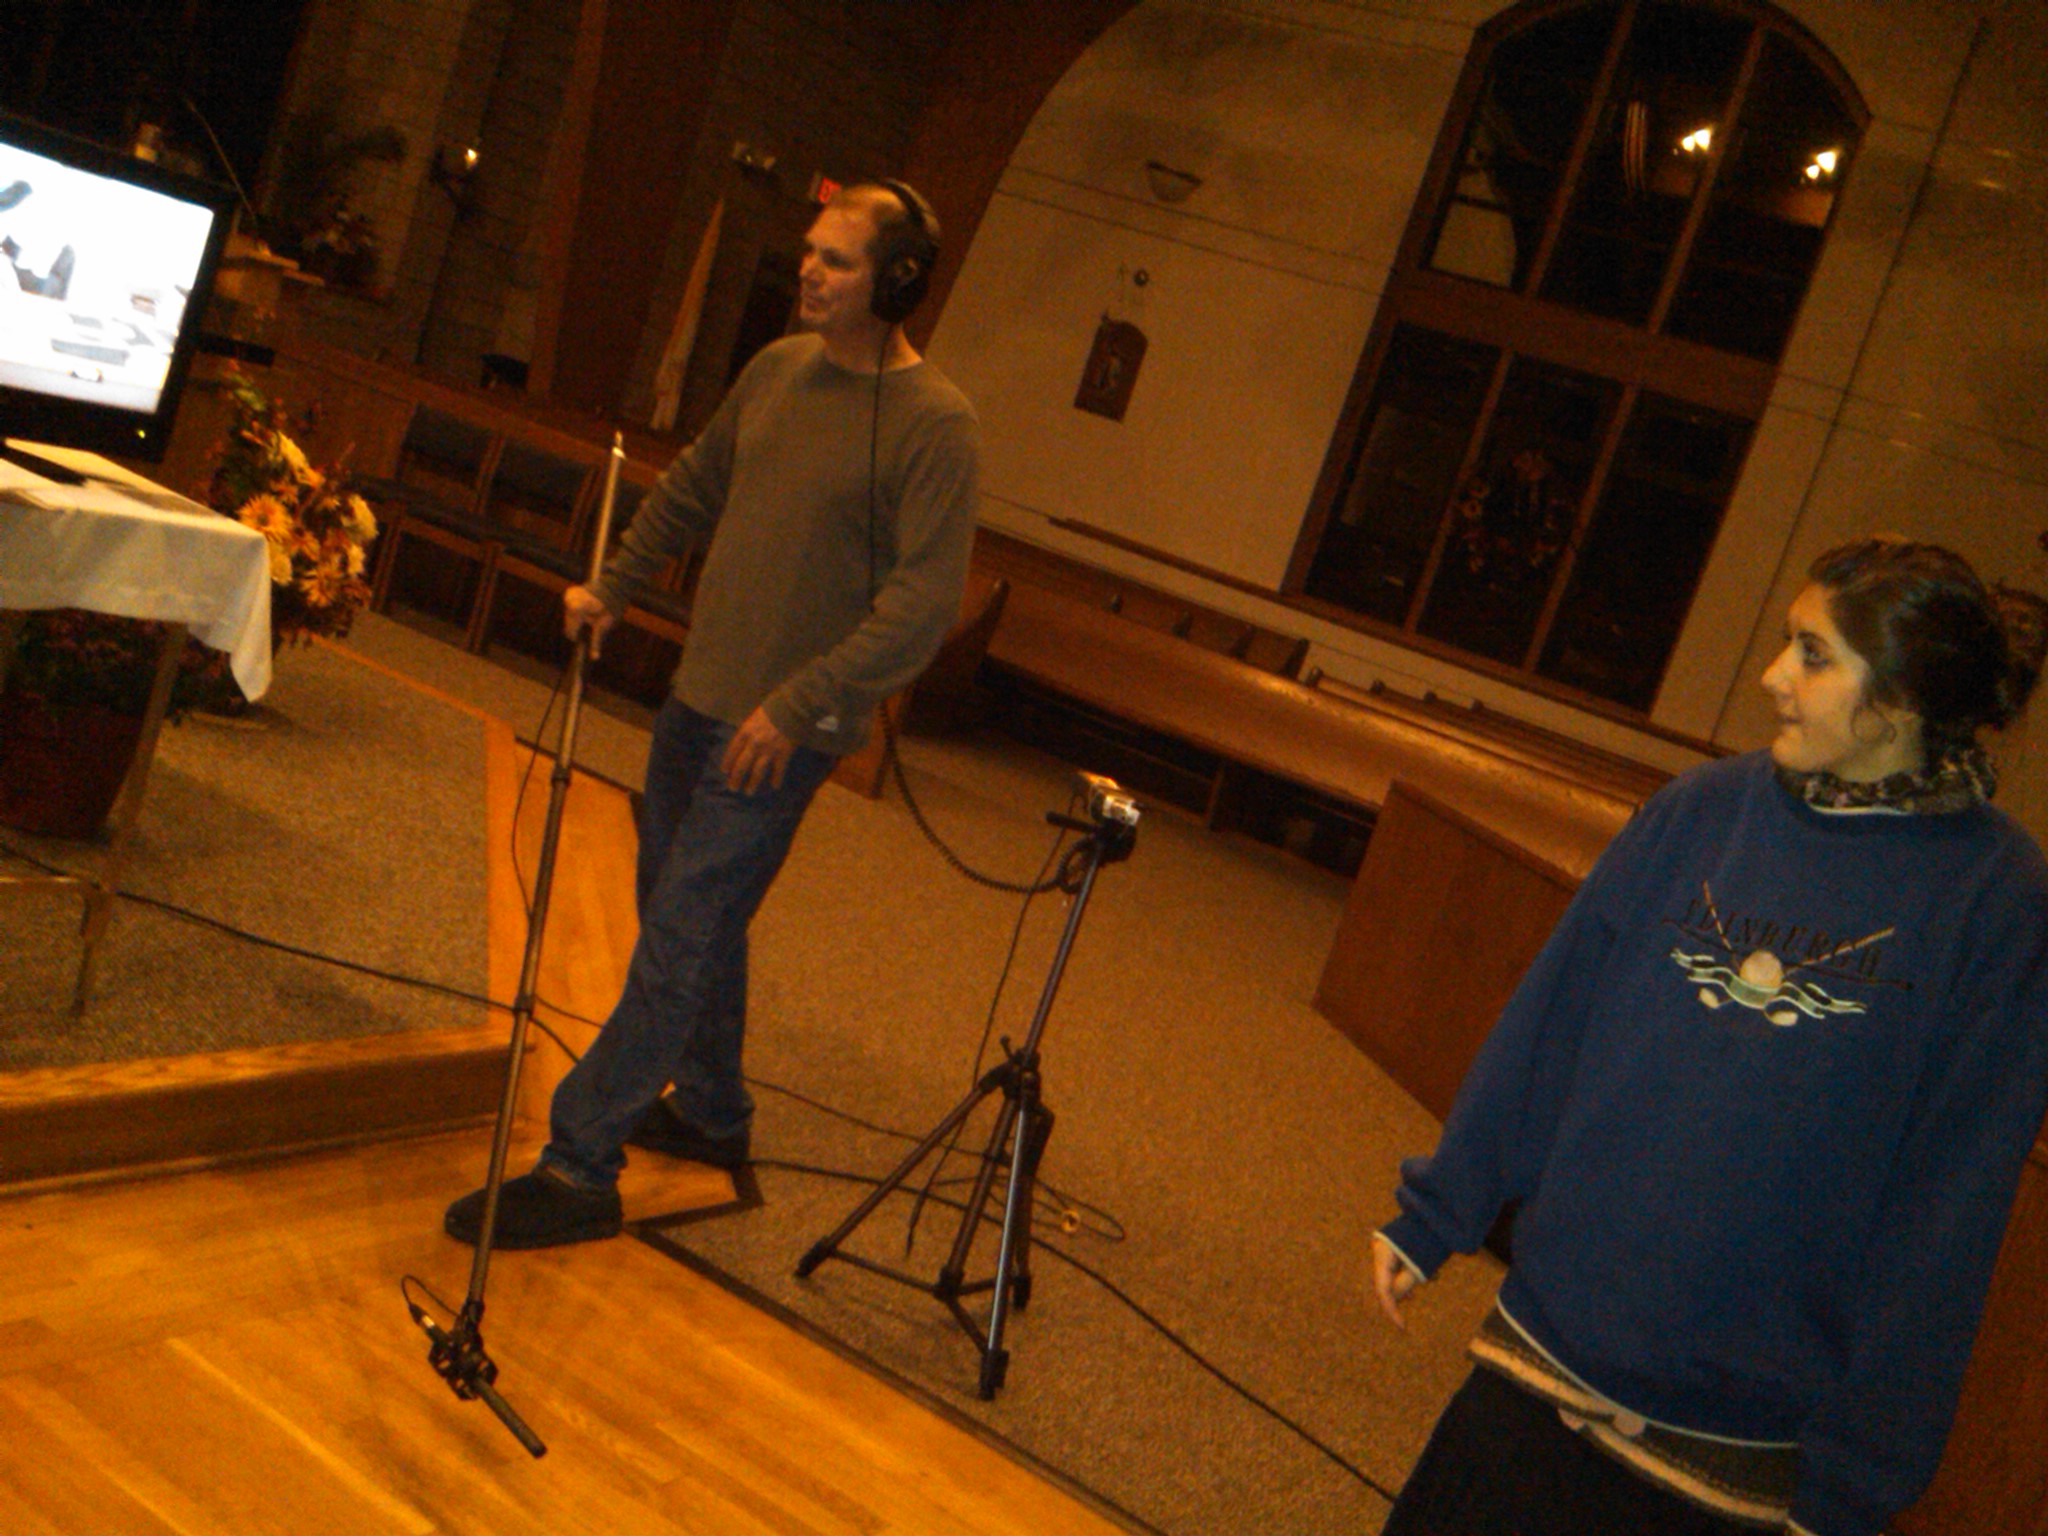 Mary Rose Maher with sound editor, Doug Schiete doing Foley for the movie Leonie!